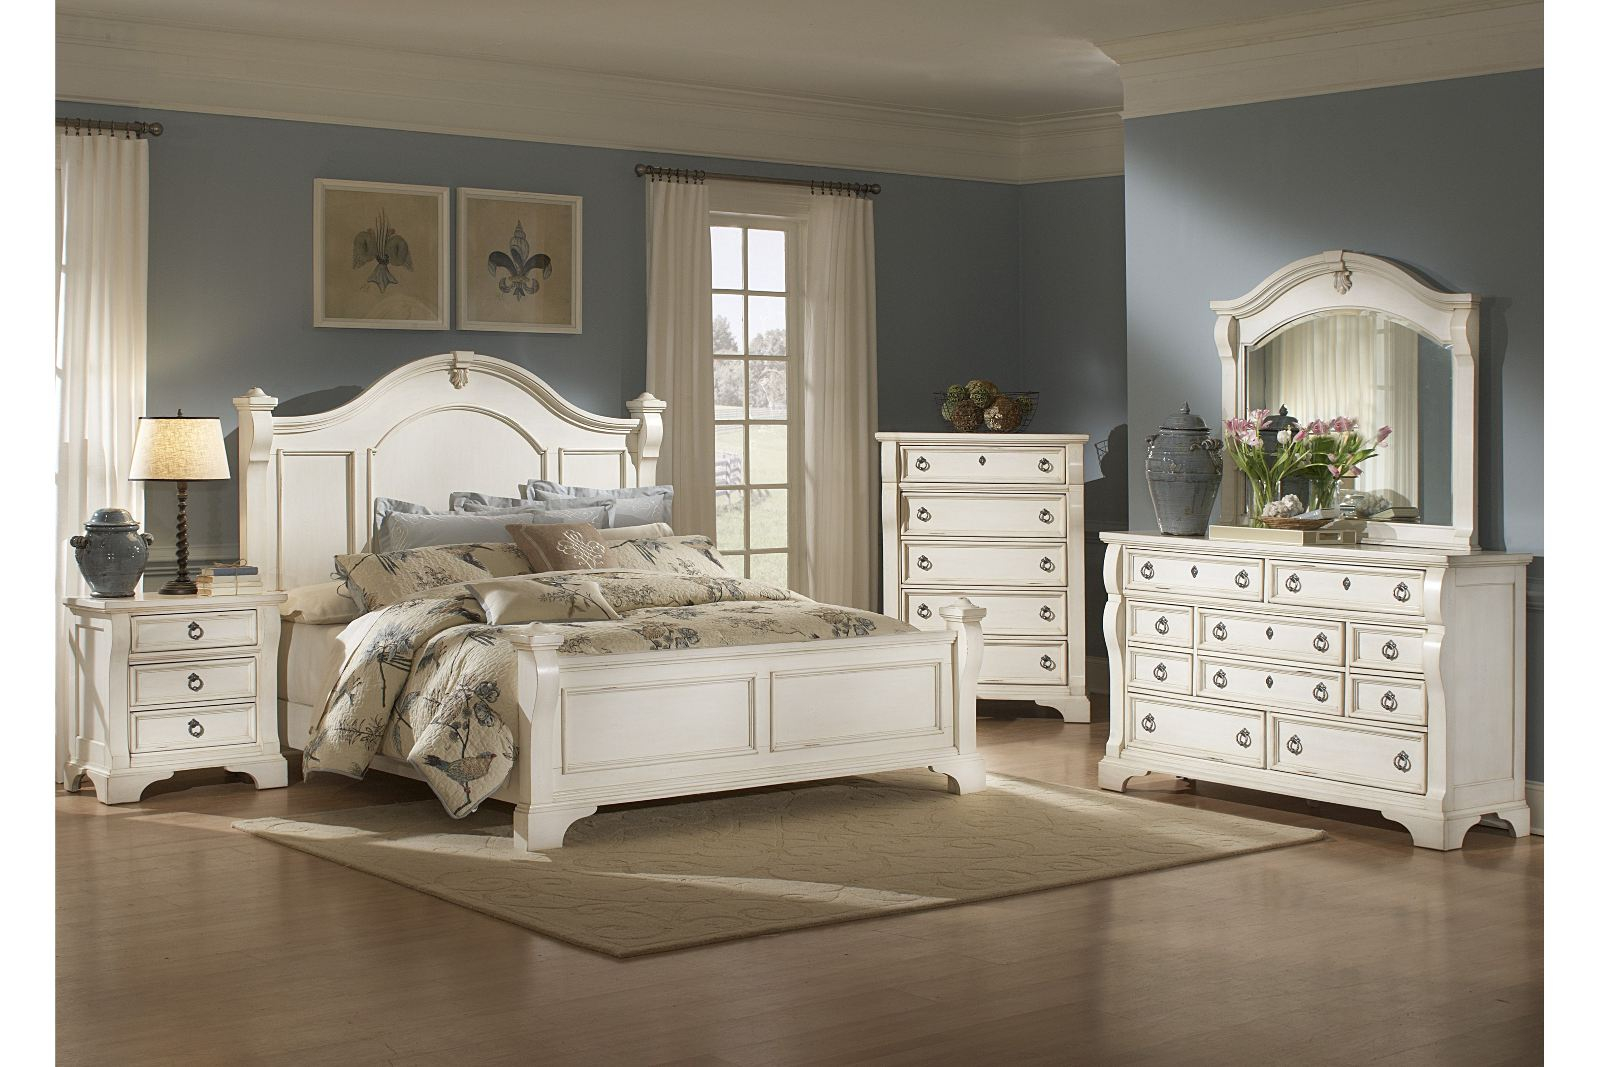 American Woodcrafters Heirloom Collection Poster Bedroom Set In Antique White 2910 throughout dimensions 1600 X 1067